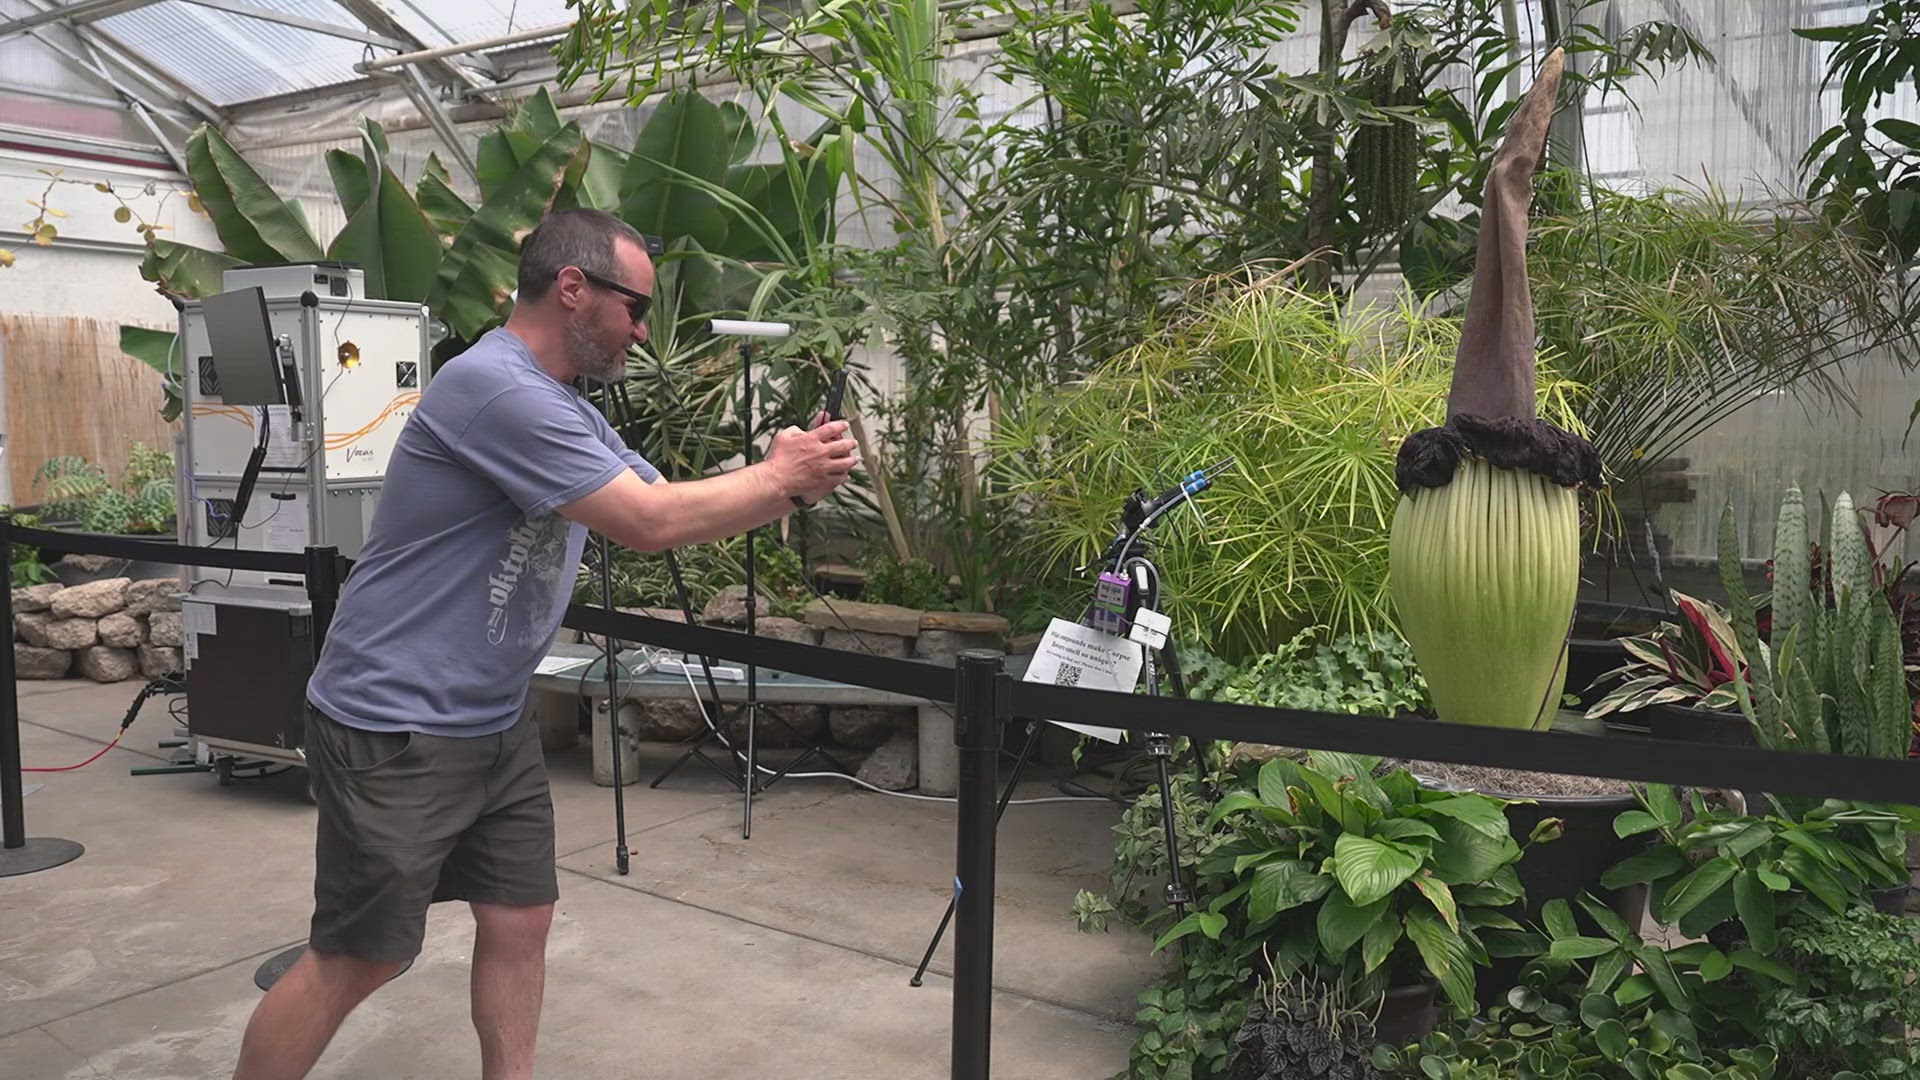 The public can view the blooming corpse flower at Colorado State University. The bloom usually lasts 24-48 hours.